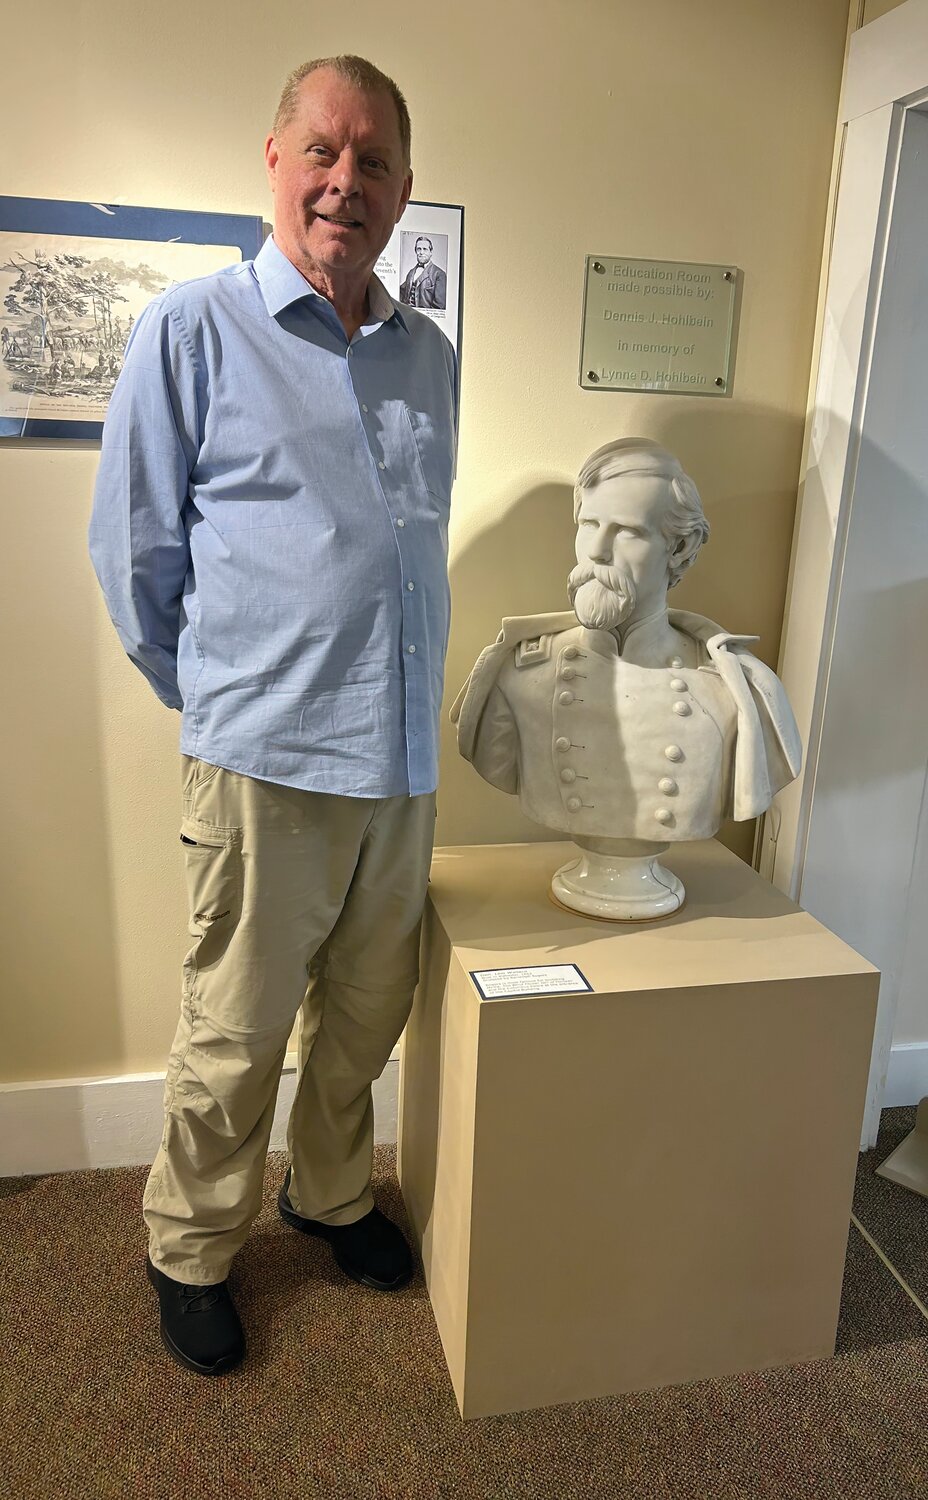 Crawfordsville native Michael E. Fox recently published “Lew, The Life and Times of the Author of Ben Hur.” He is pictured during a recent book-signing event with a bust of Gen. Lew Wallace which is on display at the Gen. Lew Wallace Study and Museum.